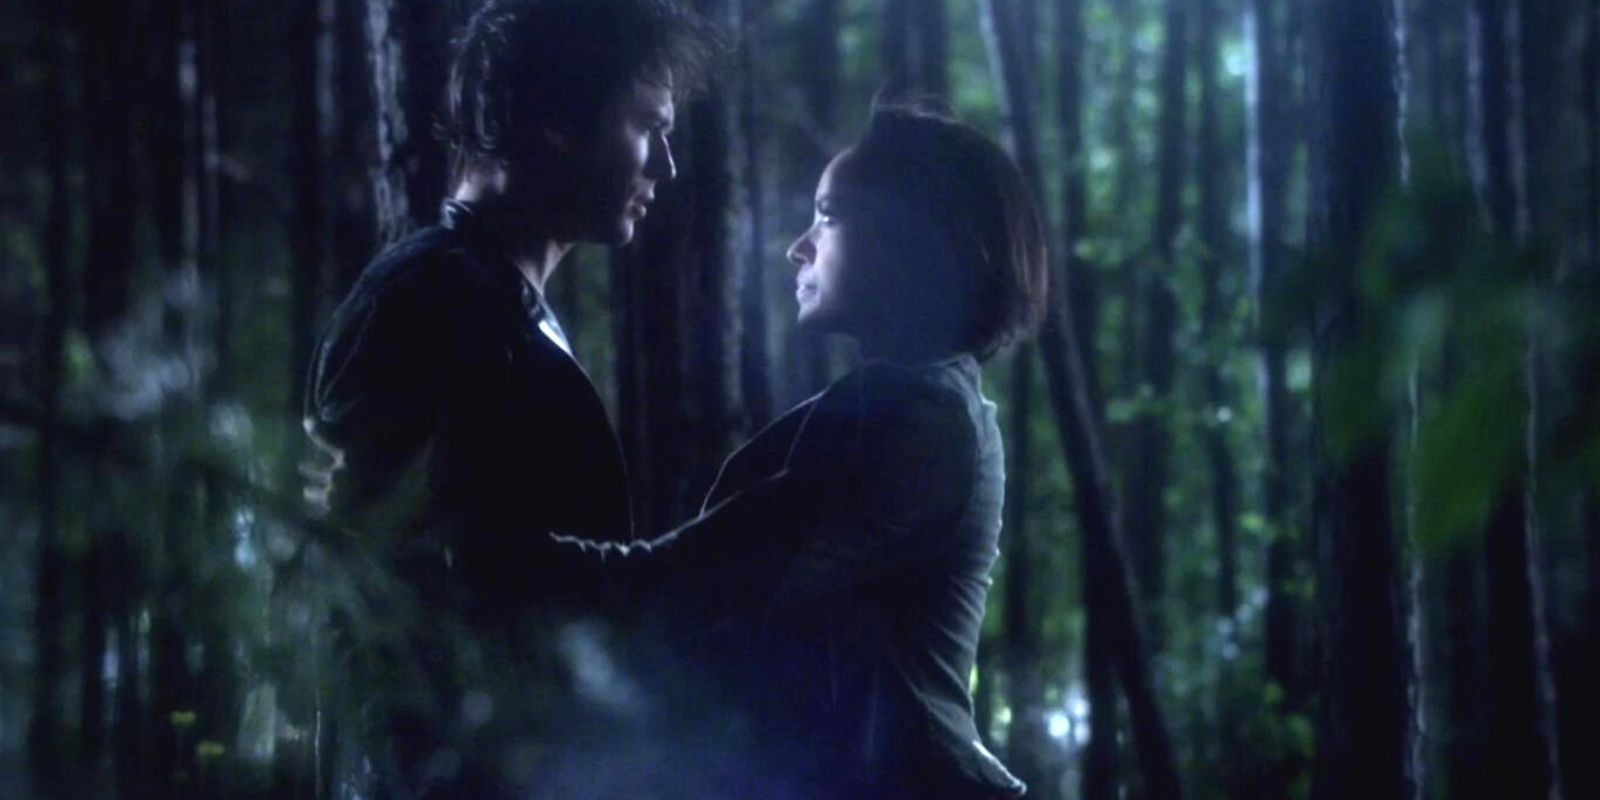 Damon and Bonnie hold on to each other in the woods